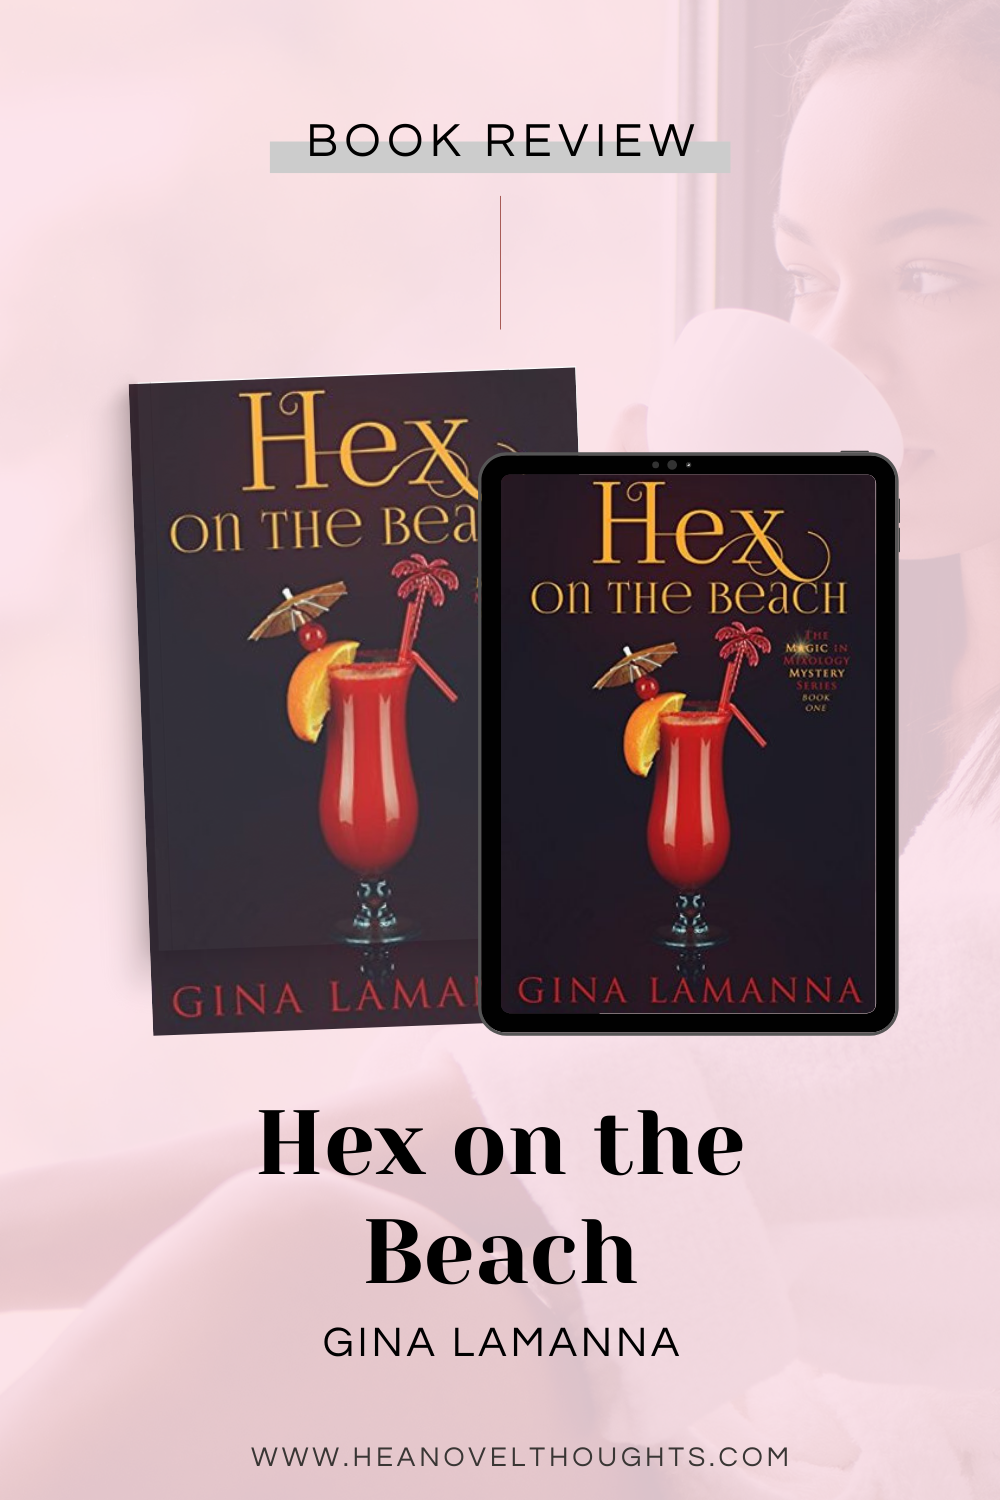 Hex on the Beach by Gina Lamanna